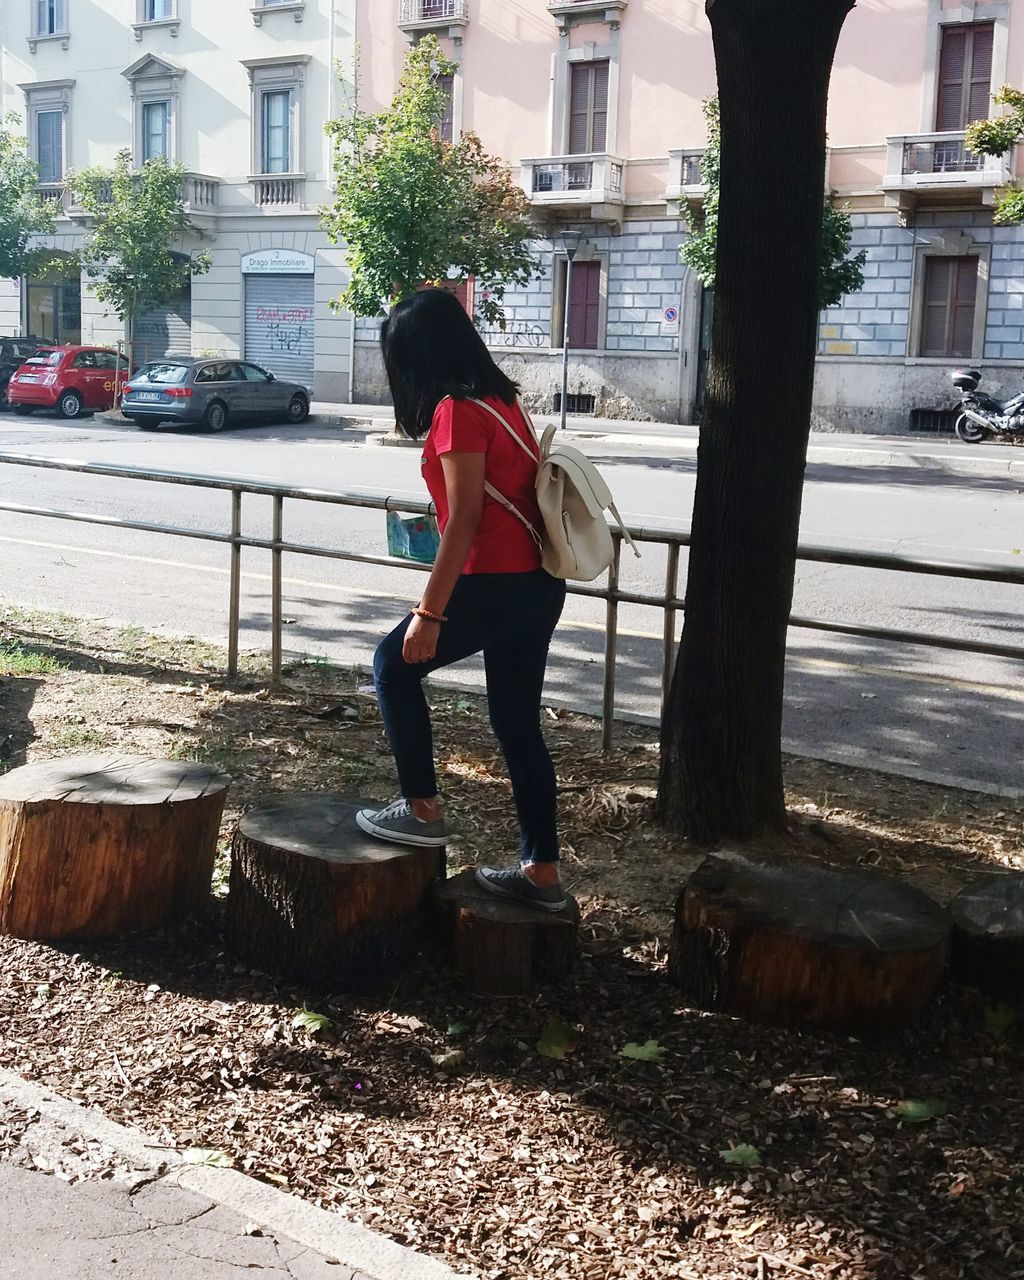 WOMAN STANDING ON TREE IN CITY